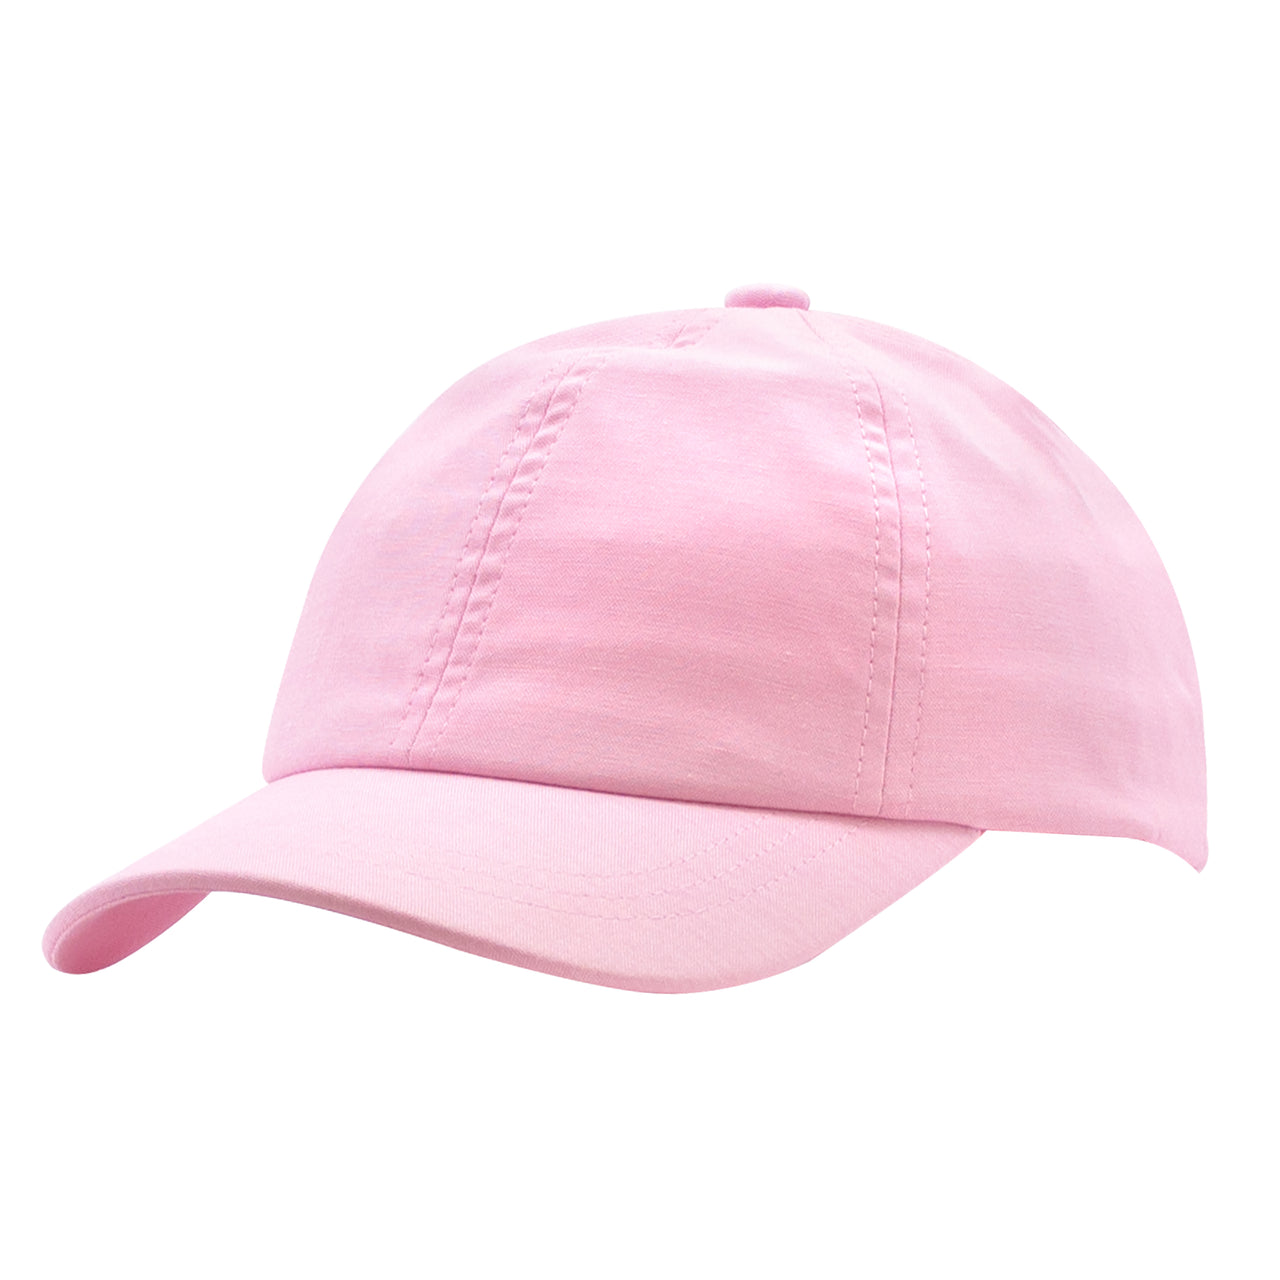 Wee Ones Chambray Ball Cap